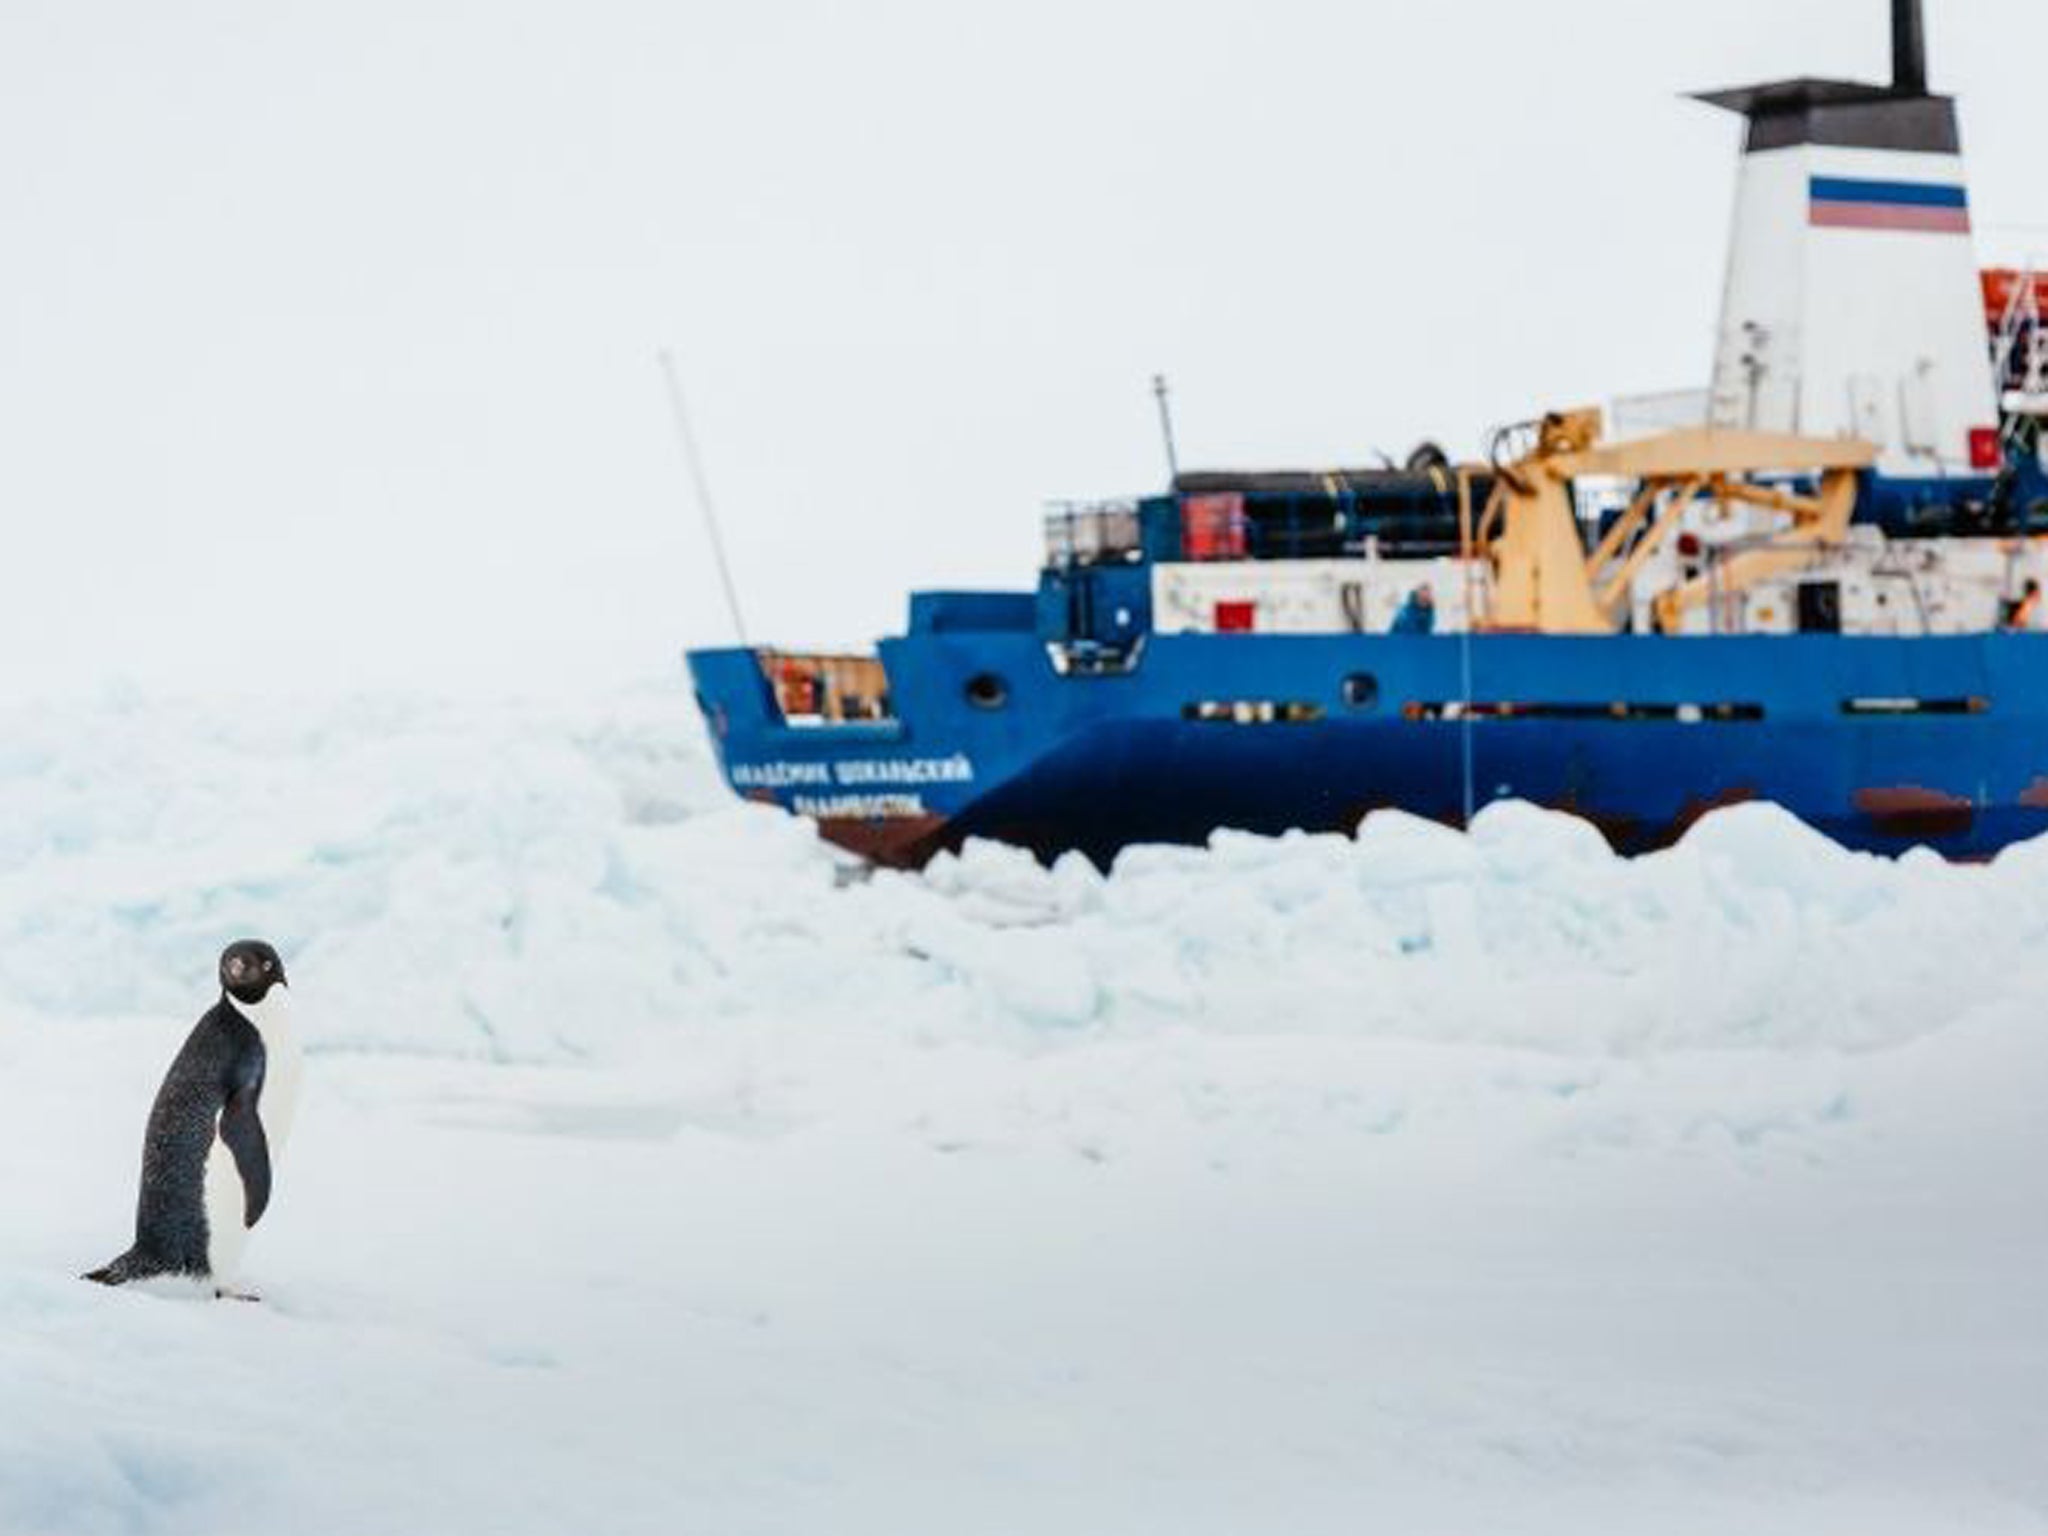 The MV Akademik Shokalskiy still stuck in the ice off East Antarctica as it awaits helicopter rescue